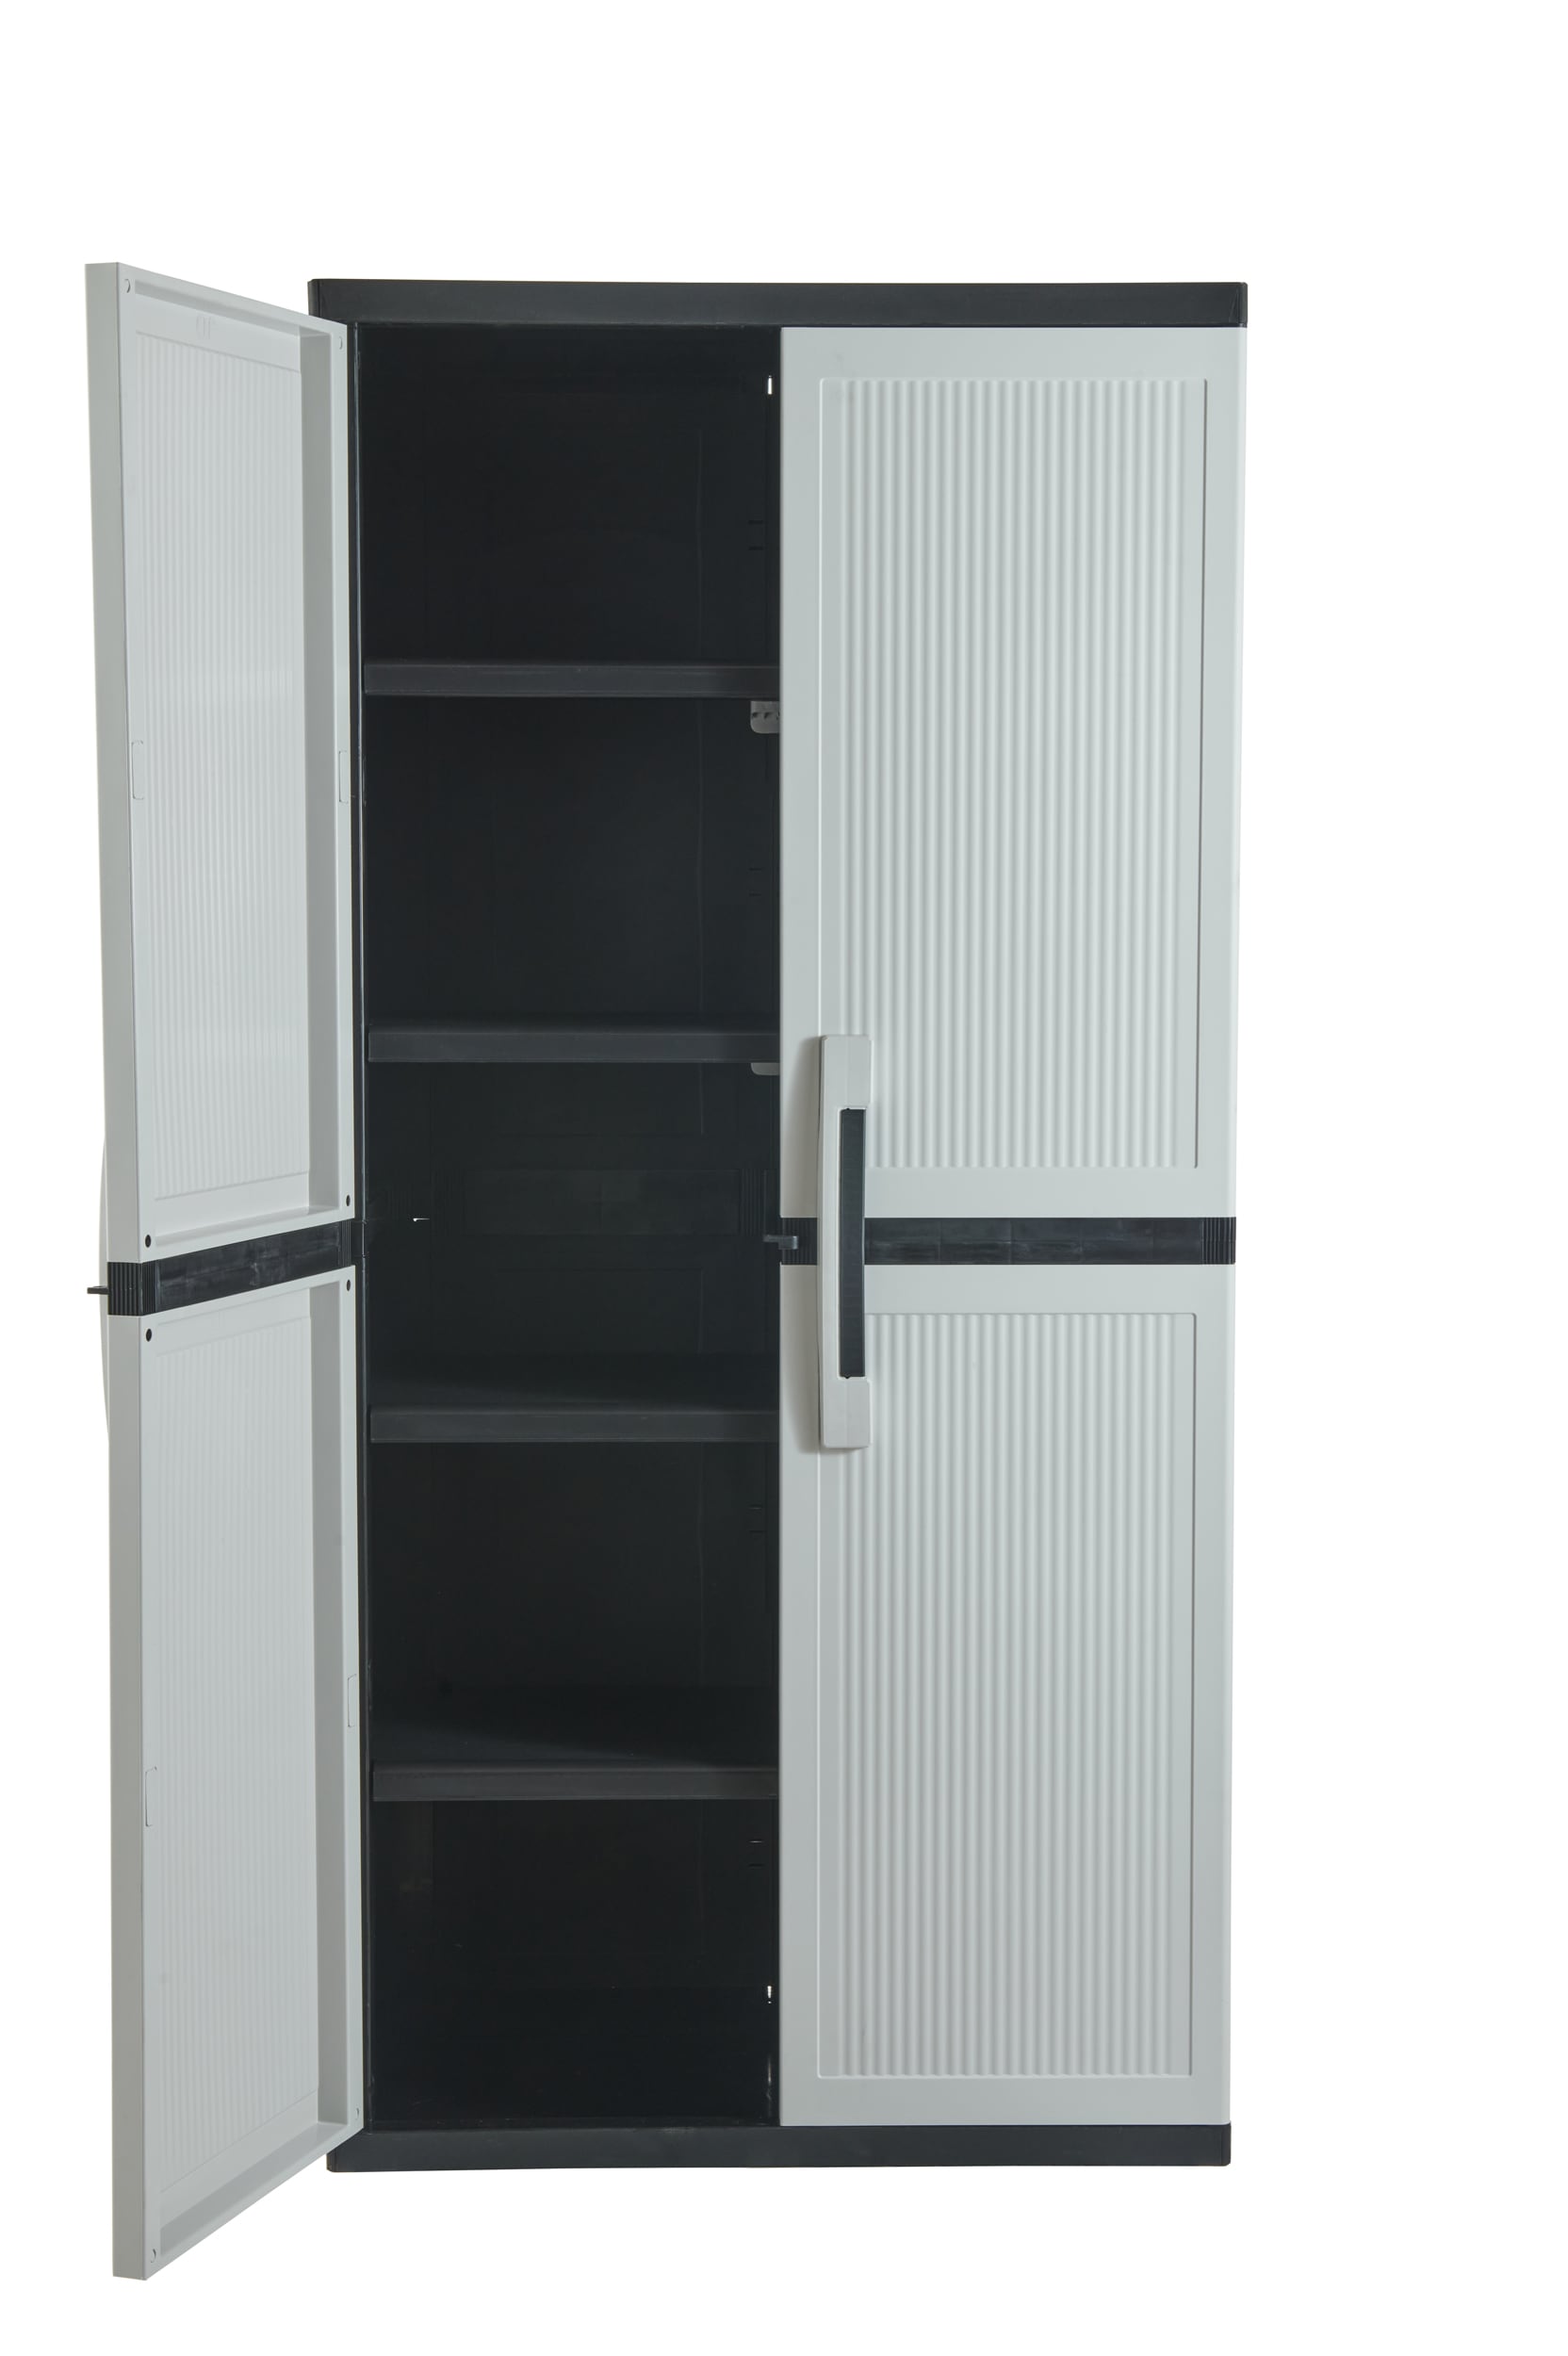 Keter Plastic Freestanding Garage Gray (34.5-in W x 70.8-in H x 17.5-in D) in the Cabinets department at Lowes.com